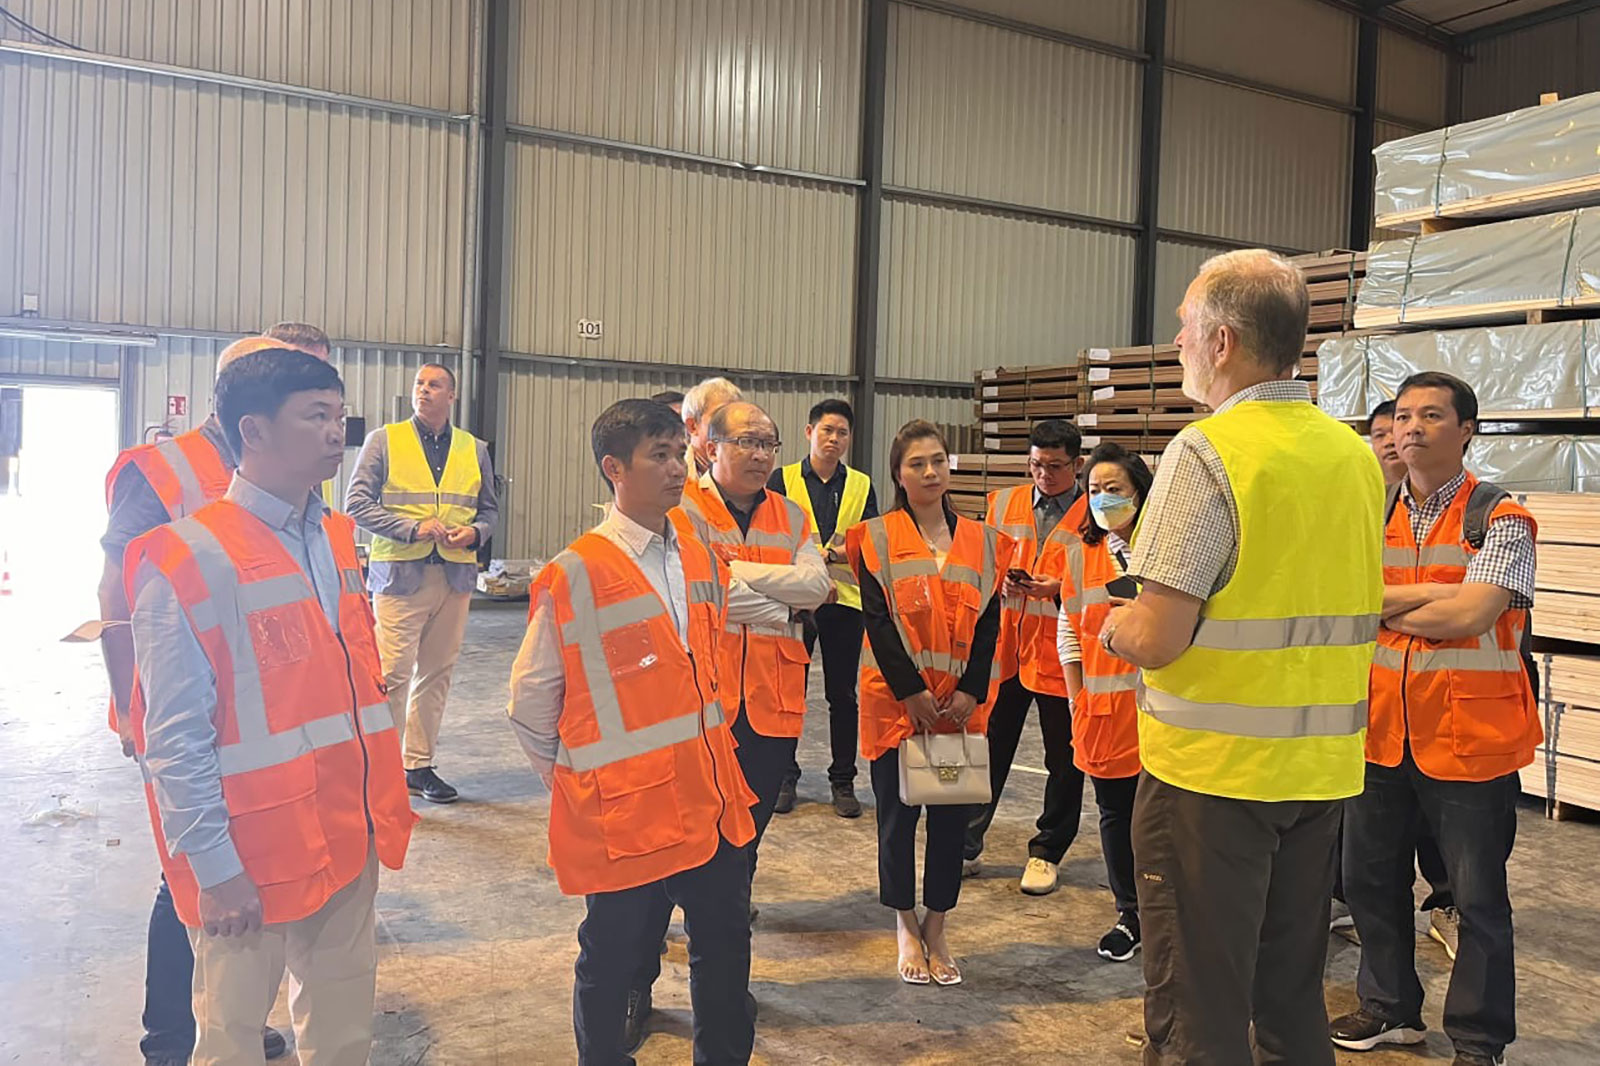 Participants of the study tour to United Kingdom and European countries visiting a wood import company and its timber warehouse in Germany. © GIZ/To Thi Thu Huong